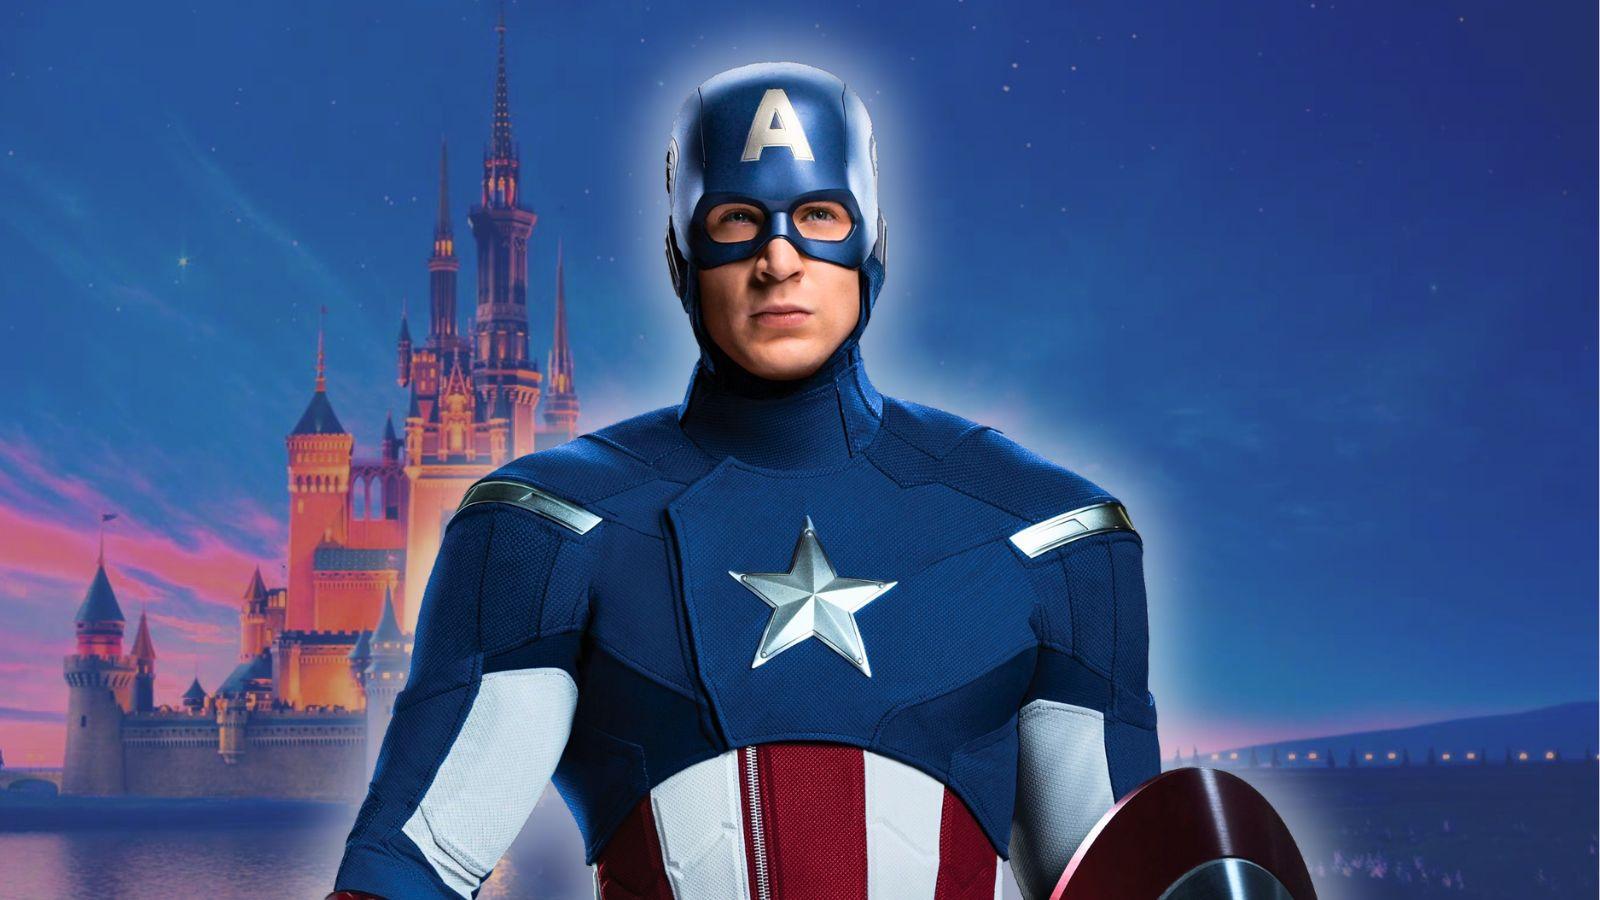 Chris Evans as Captain America in front of the Disney castle.